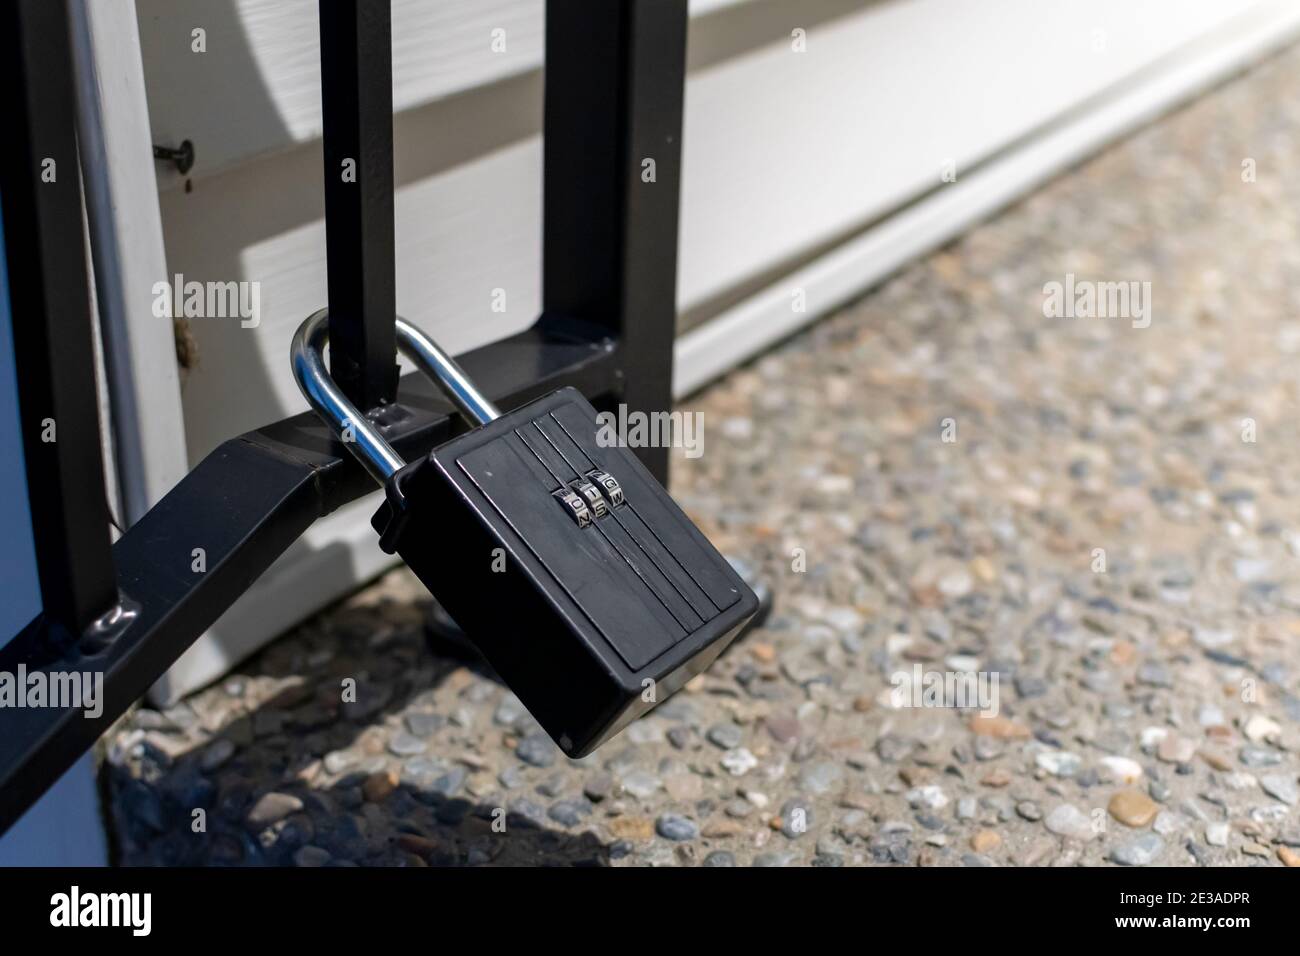 A closed combination lock or padlock attached to an iron gate at a home. Stock Photo